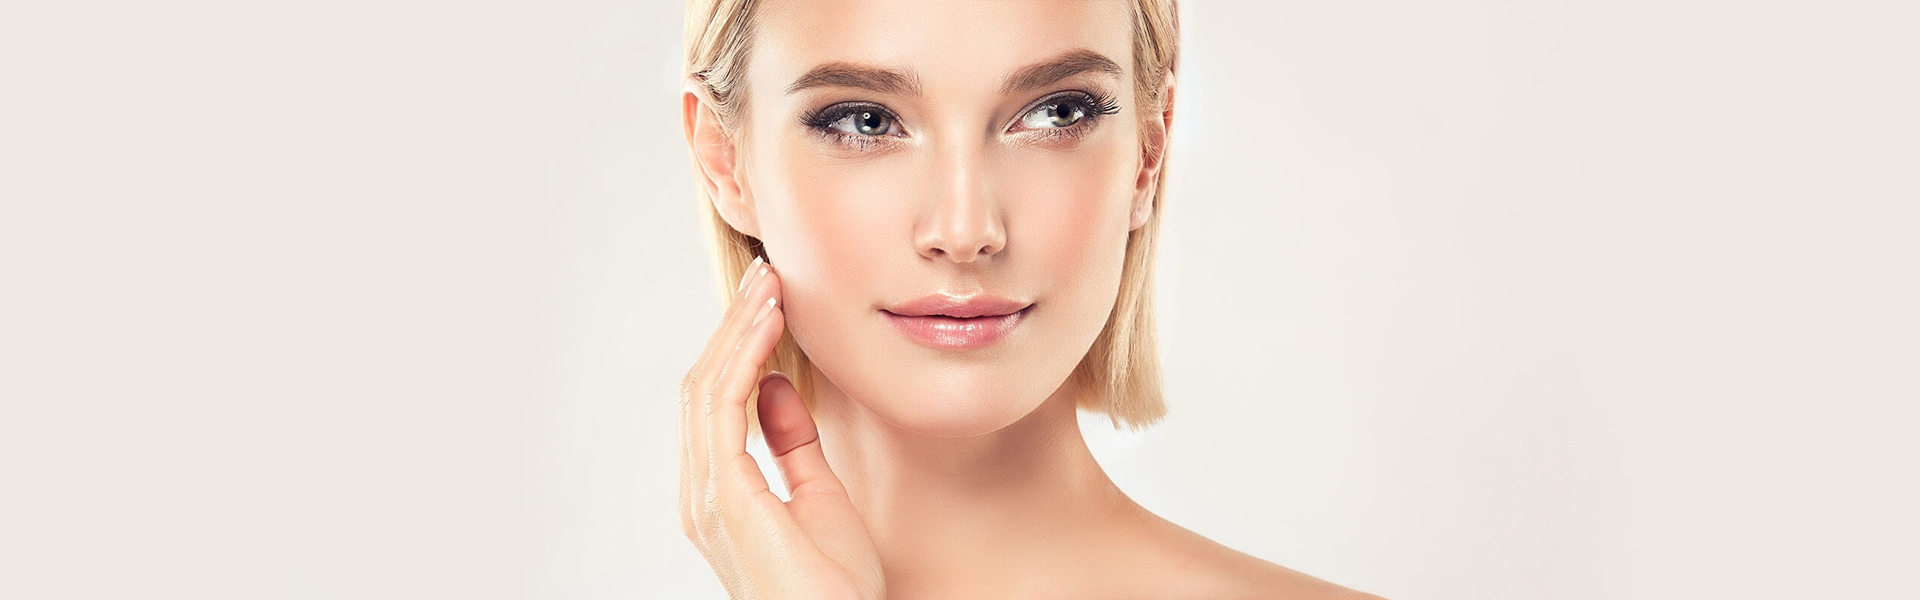 If Dermal Fillers Are The Cosmetic For You, Then You Must Know These Five Things